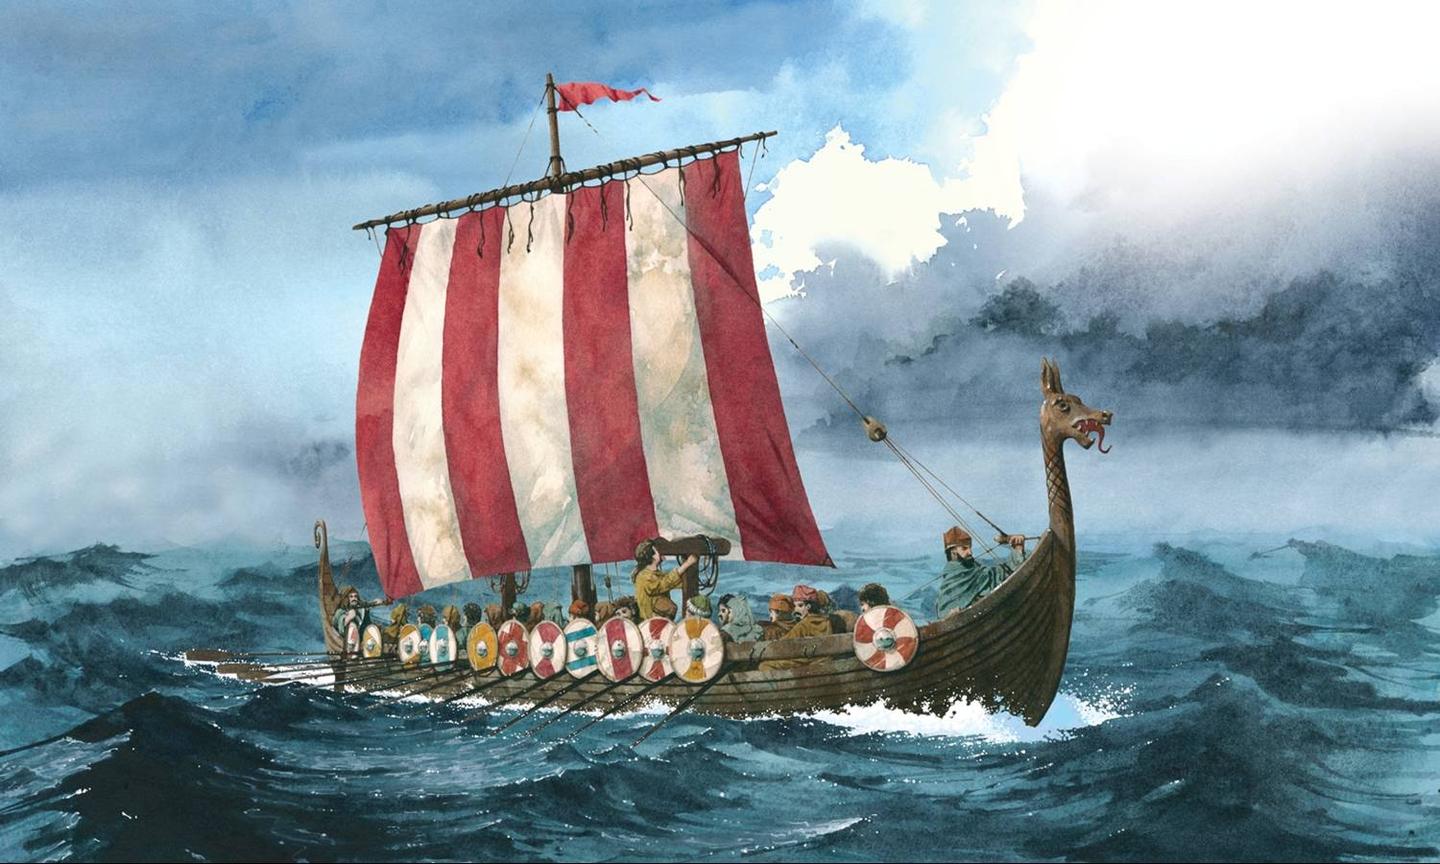 beowulf and his warriors journey to denmark primarily to